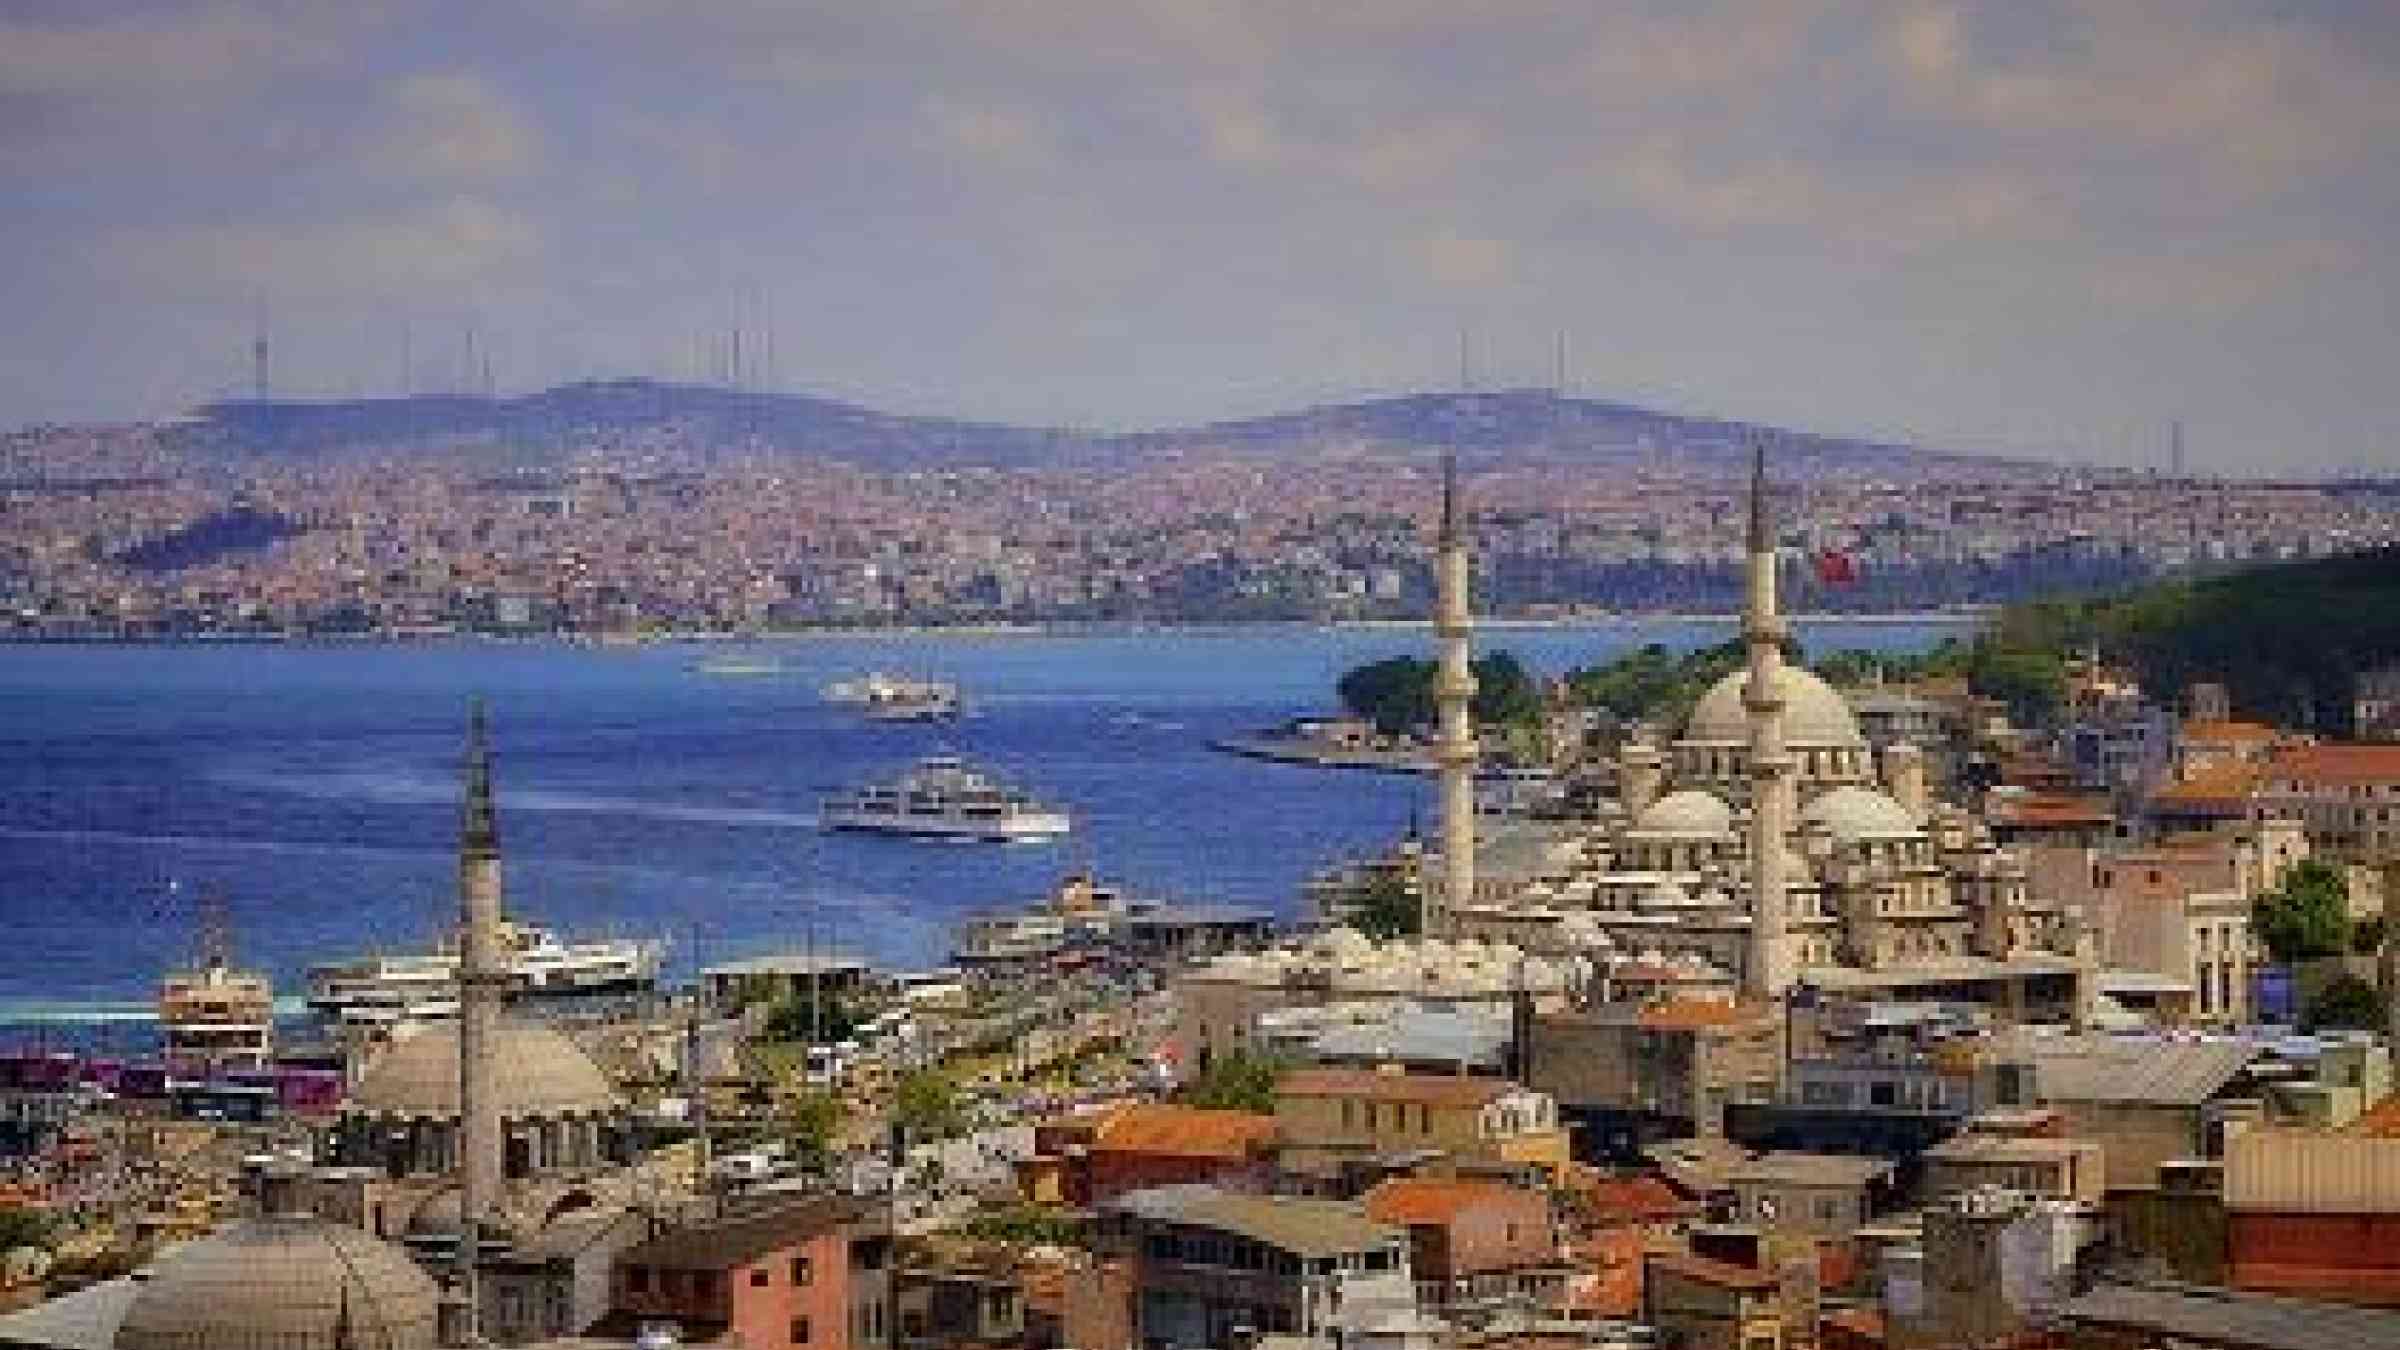 The Turkish metropolis of Istanbul is the host for the latest meeting of the European Forum for Disaster Risk Reduction, which groups countries from across the continent and has catalysed efforts to curb the threats posed by hazards (Photo: Pedro Szekely)